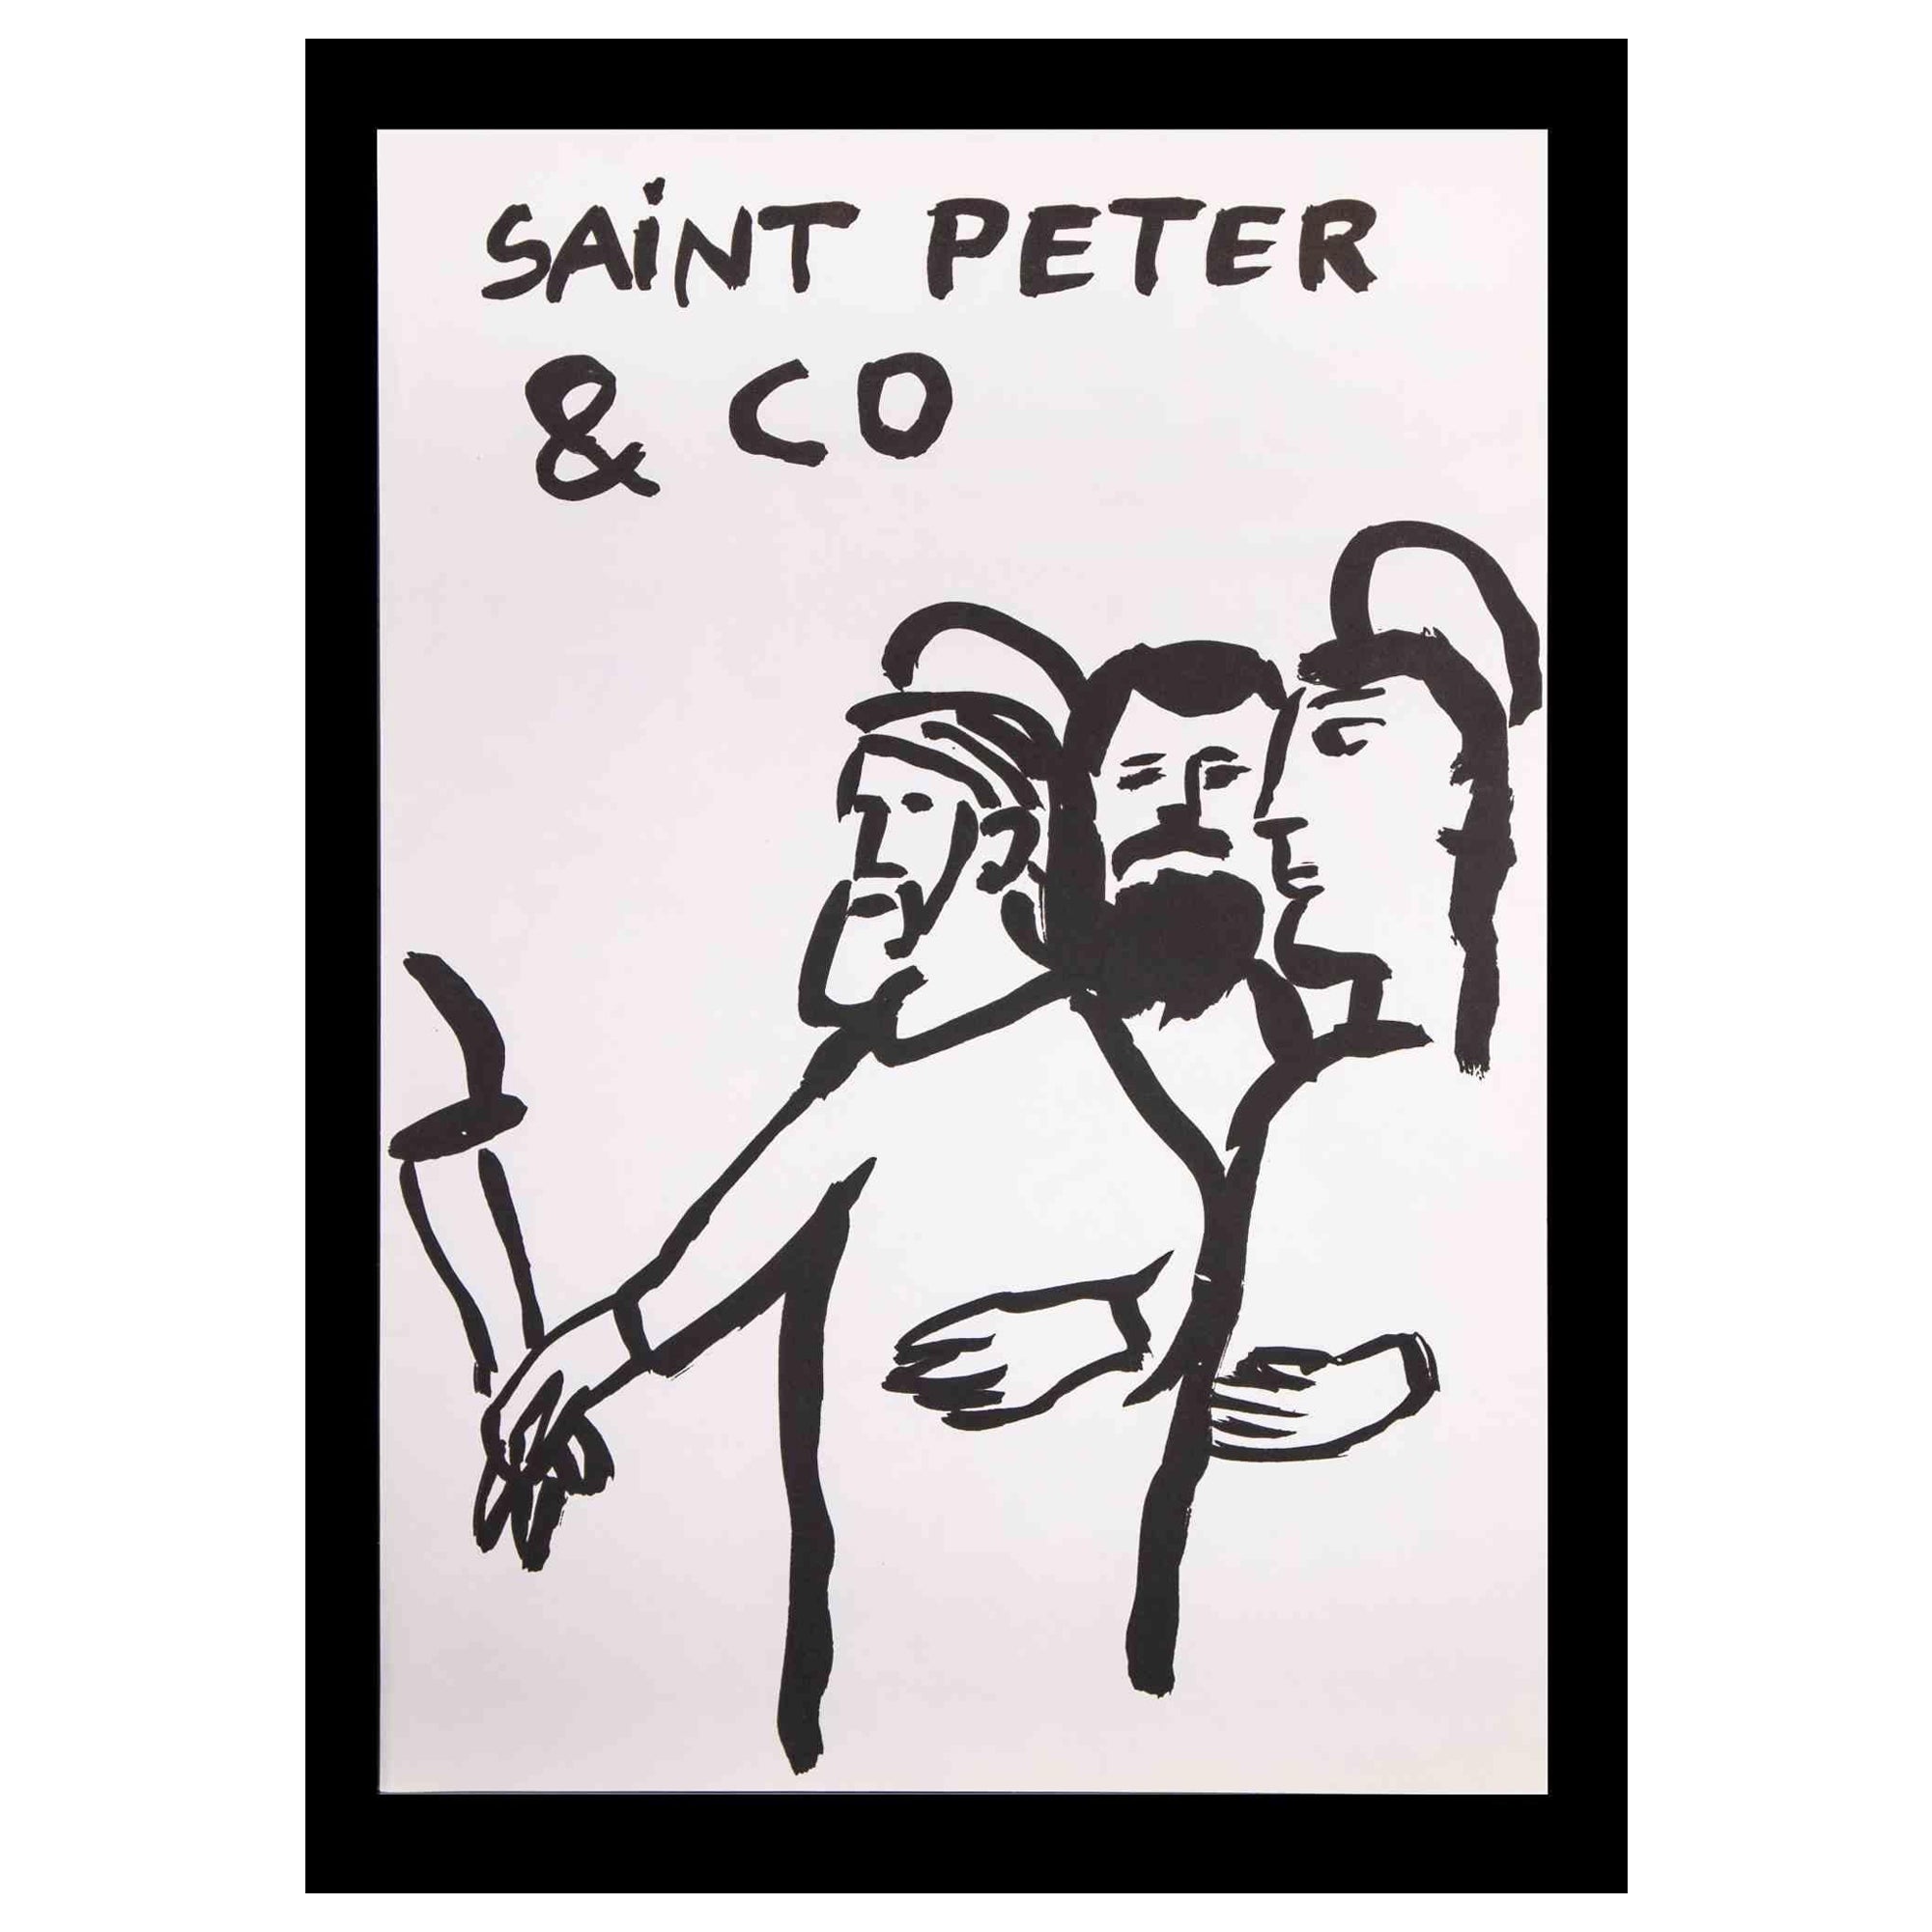 Saint Peter & Co - Vintage Offset by Various Artists  - 1970s